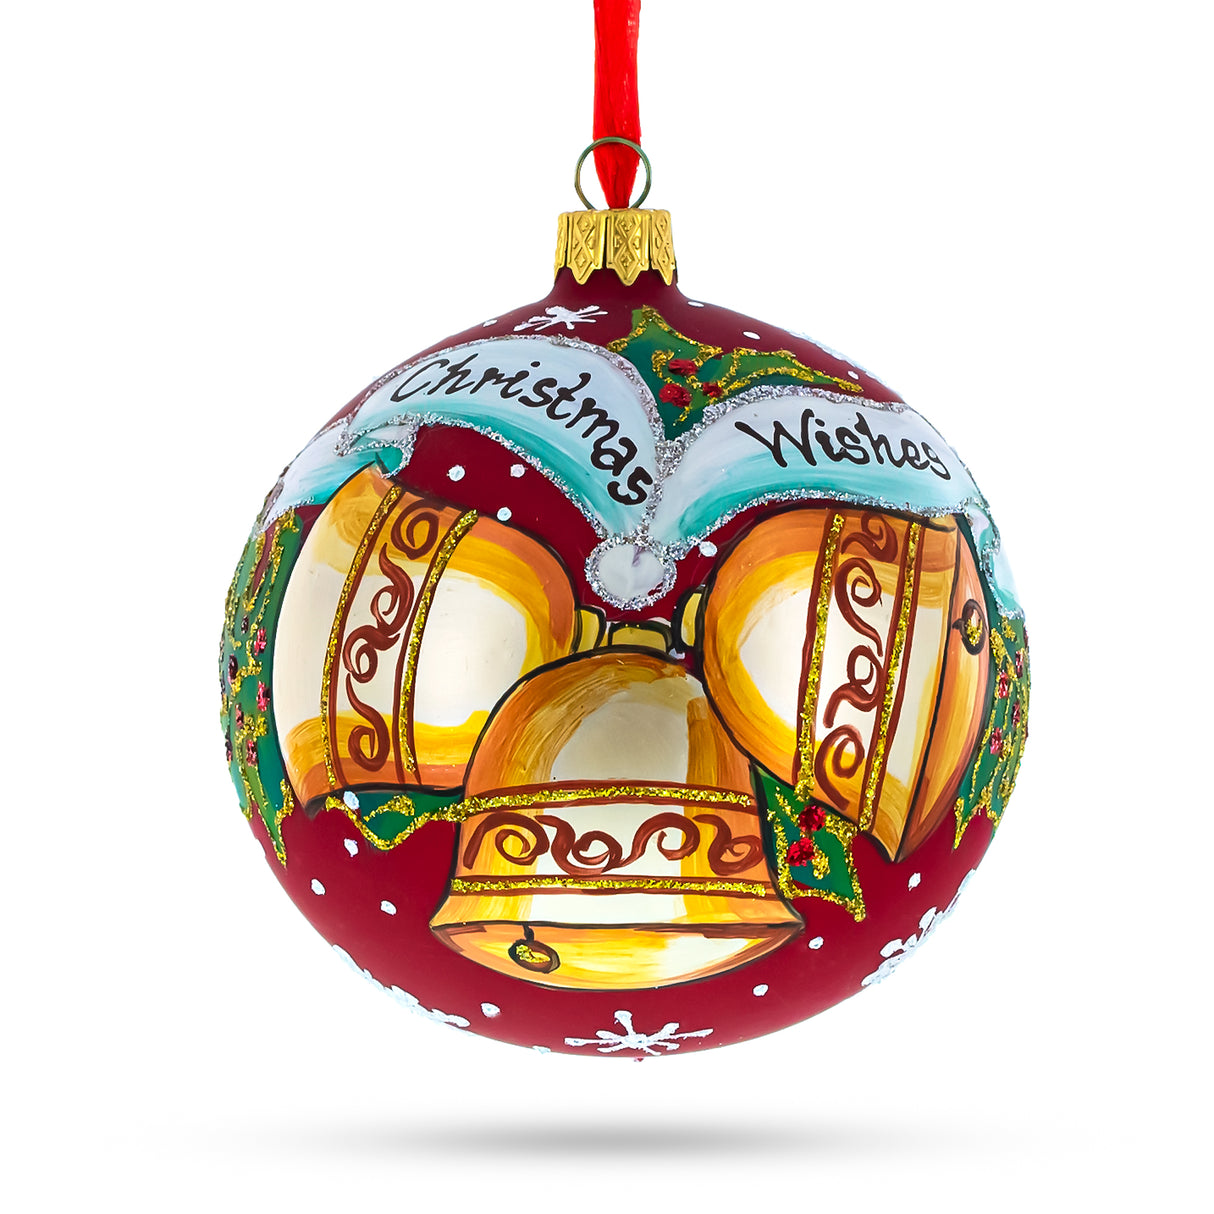 Harmony Trio: Three Bells Blown Glass Ball Christmas Ornament 4 Inches in Multi color, Round shape